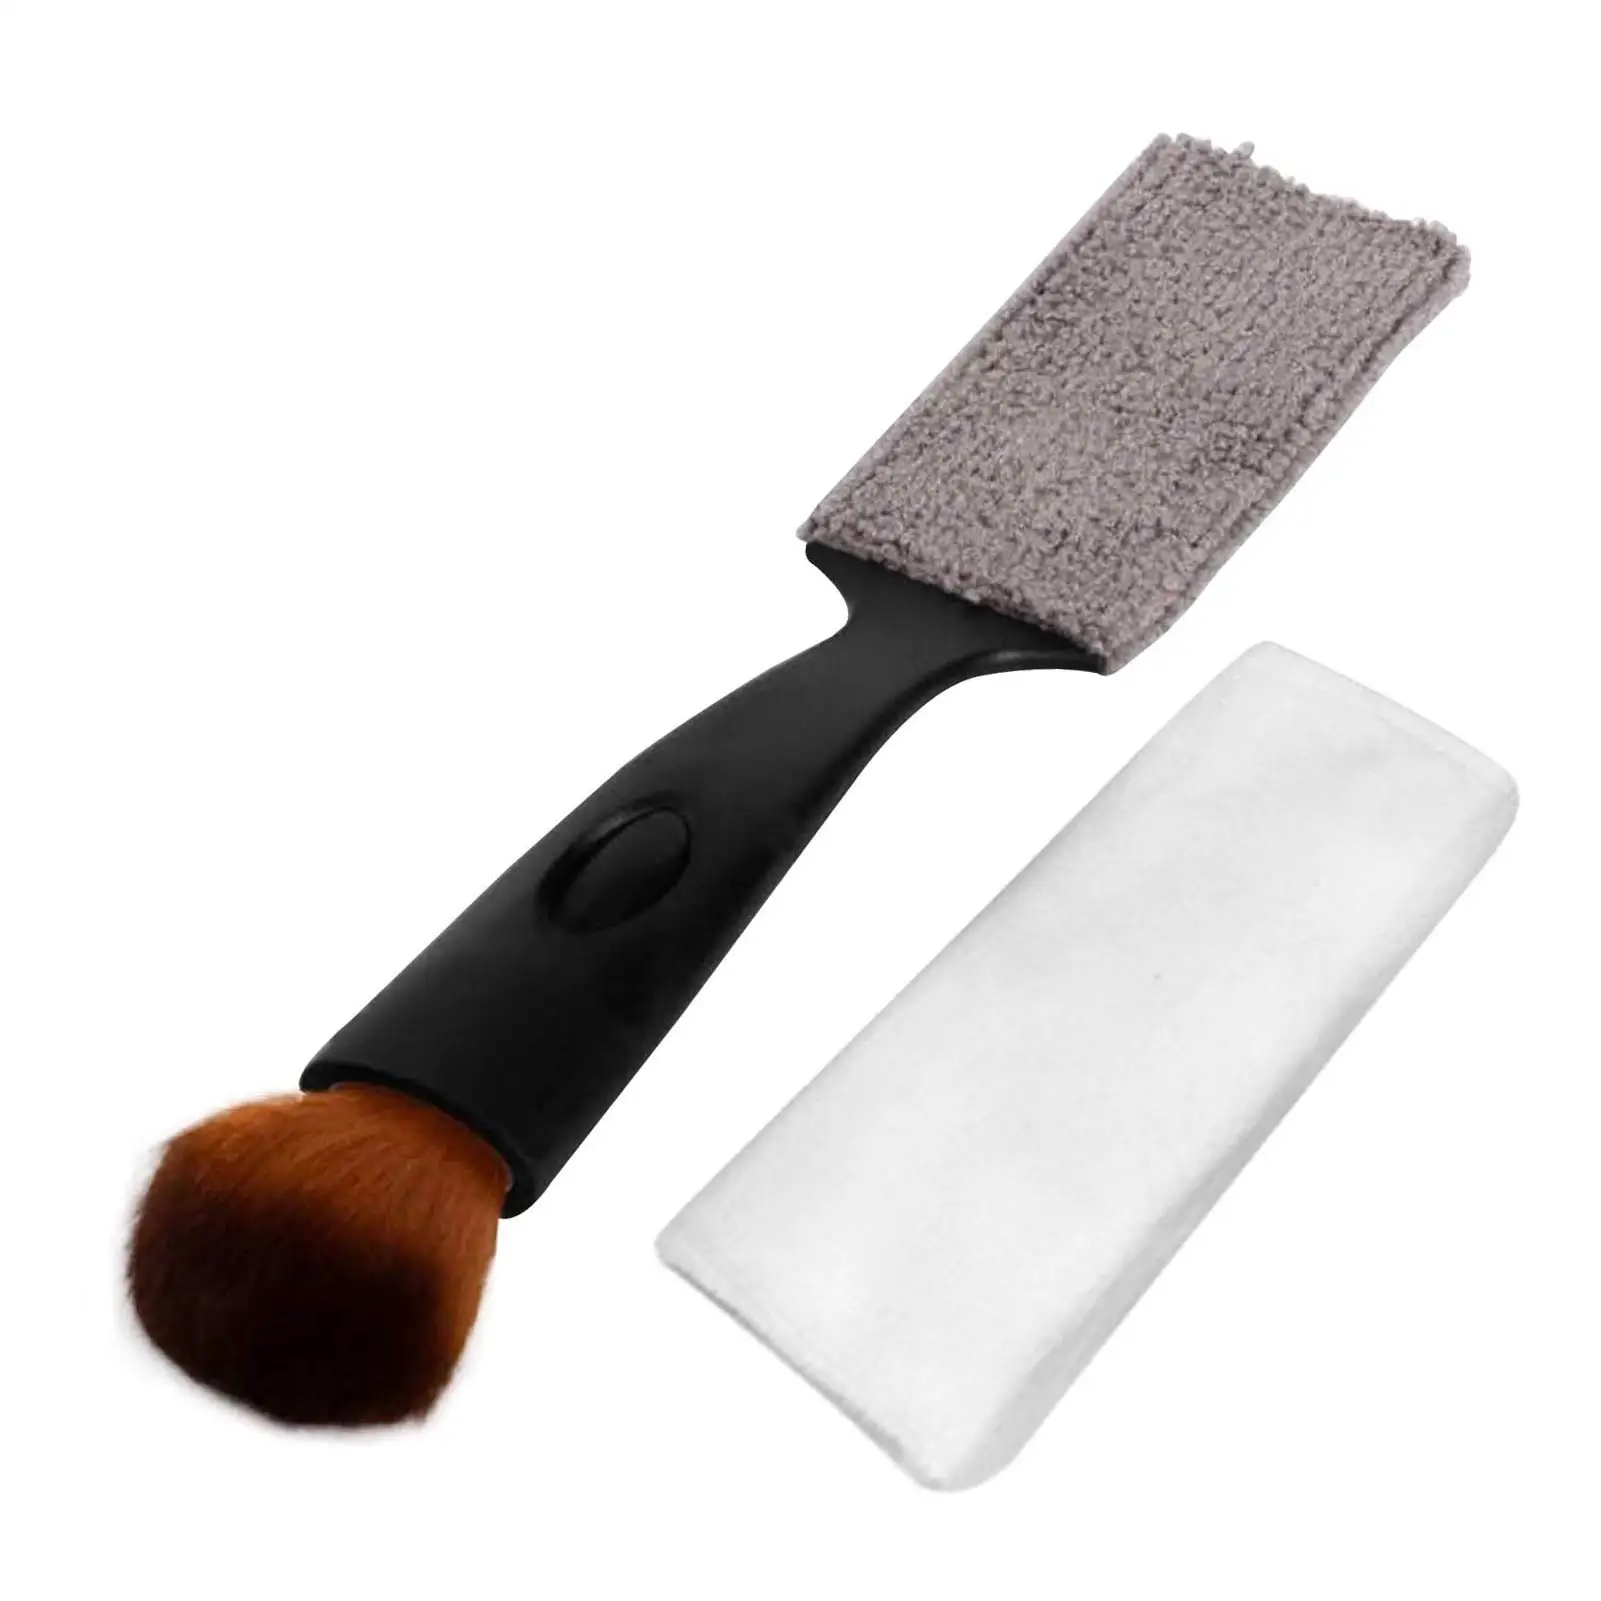 Car Cleaning Brush Dusting Remove Double Side For Air Conditioning Panel Gap Auto Wash Tools Car Meter Detailing Cleaner steam cleaner multi function car wash in addition to formaldehyde fumigation disinfection air conditioning range hood cleaning